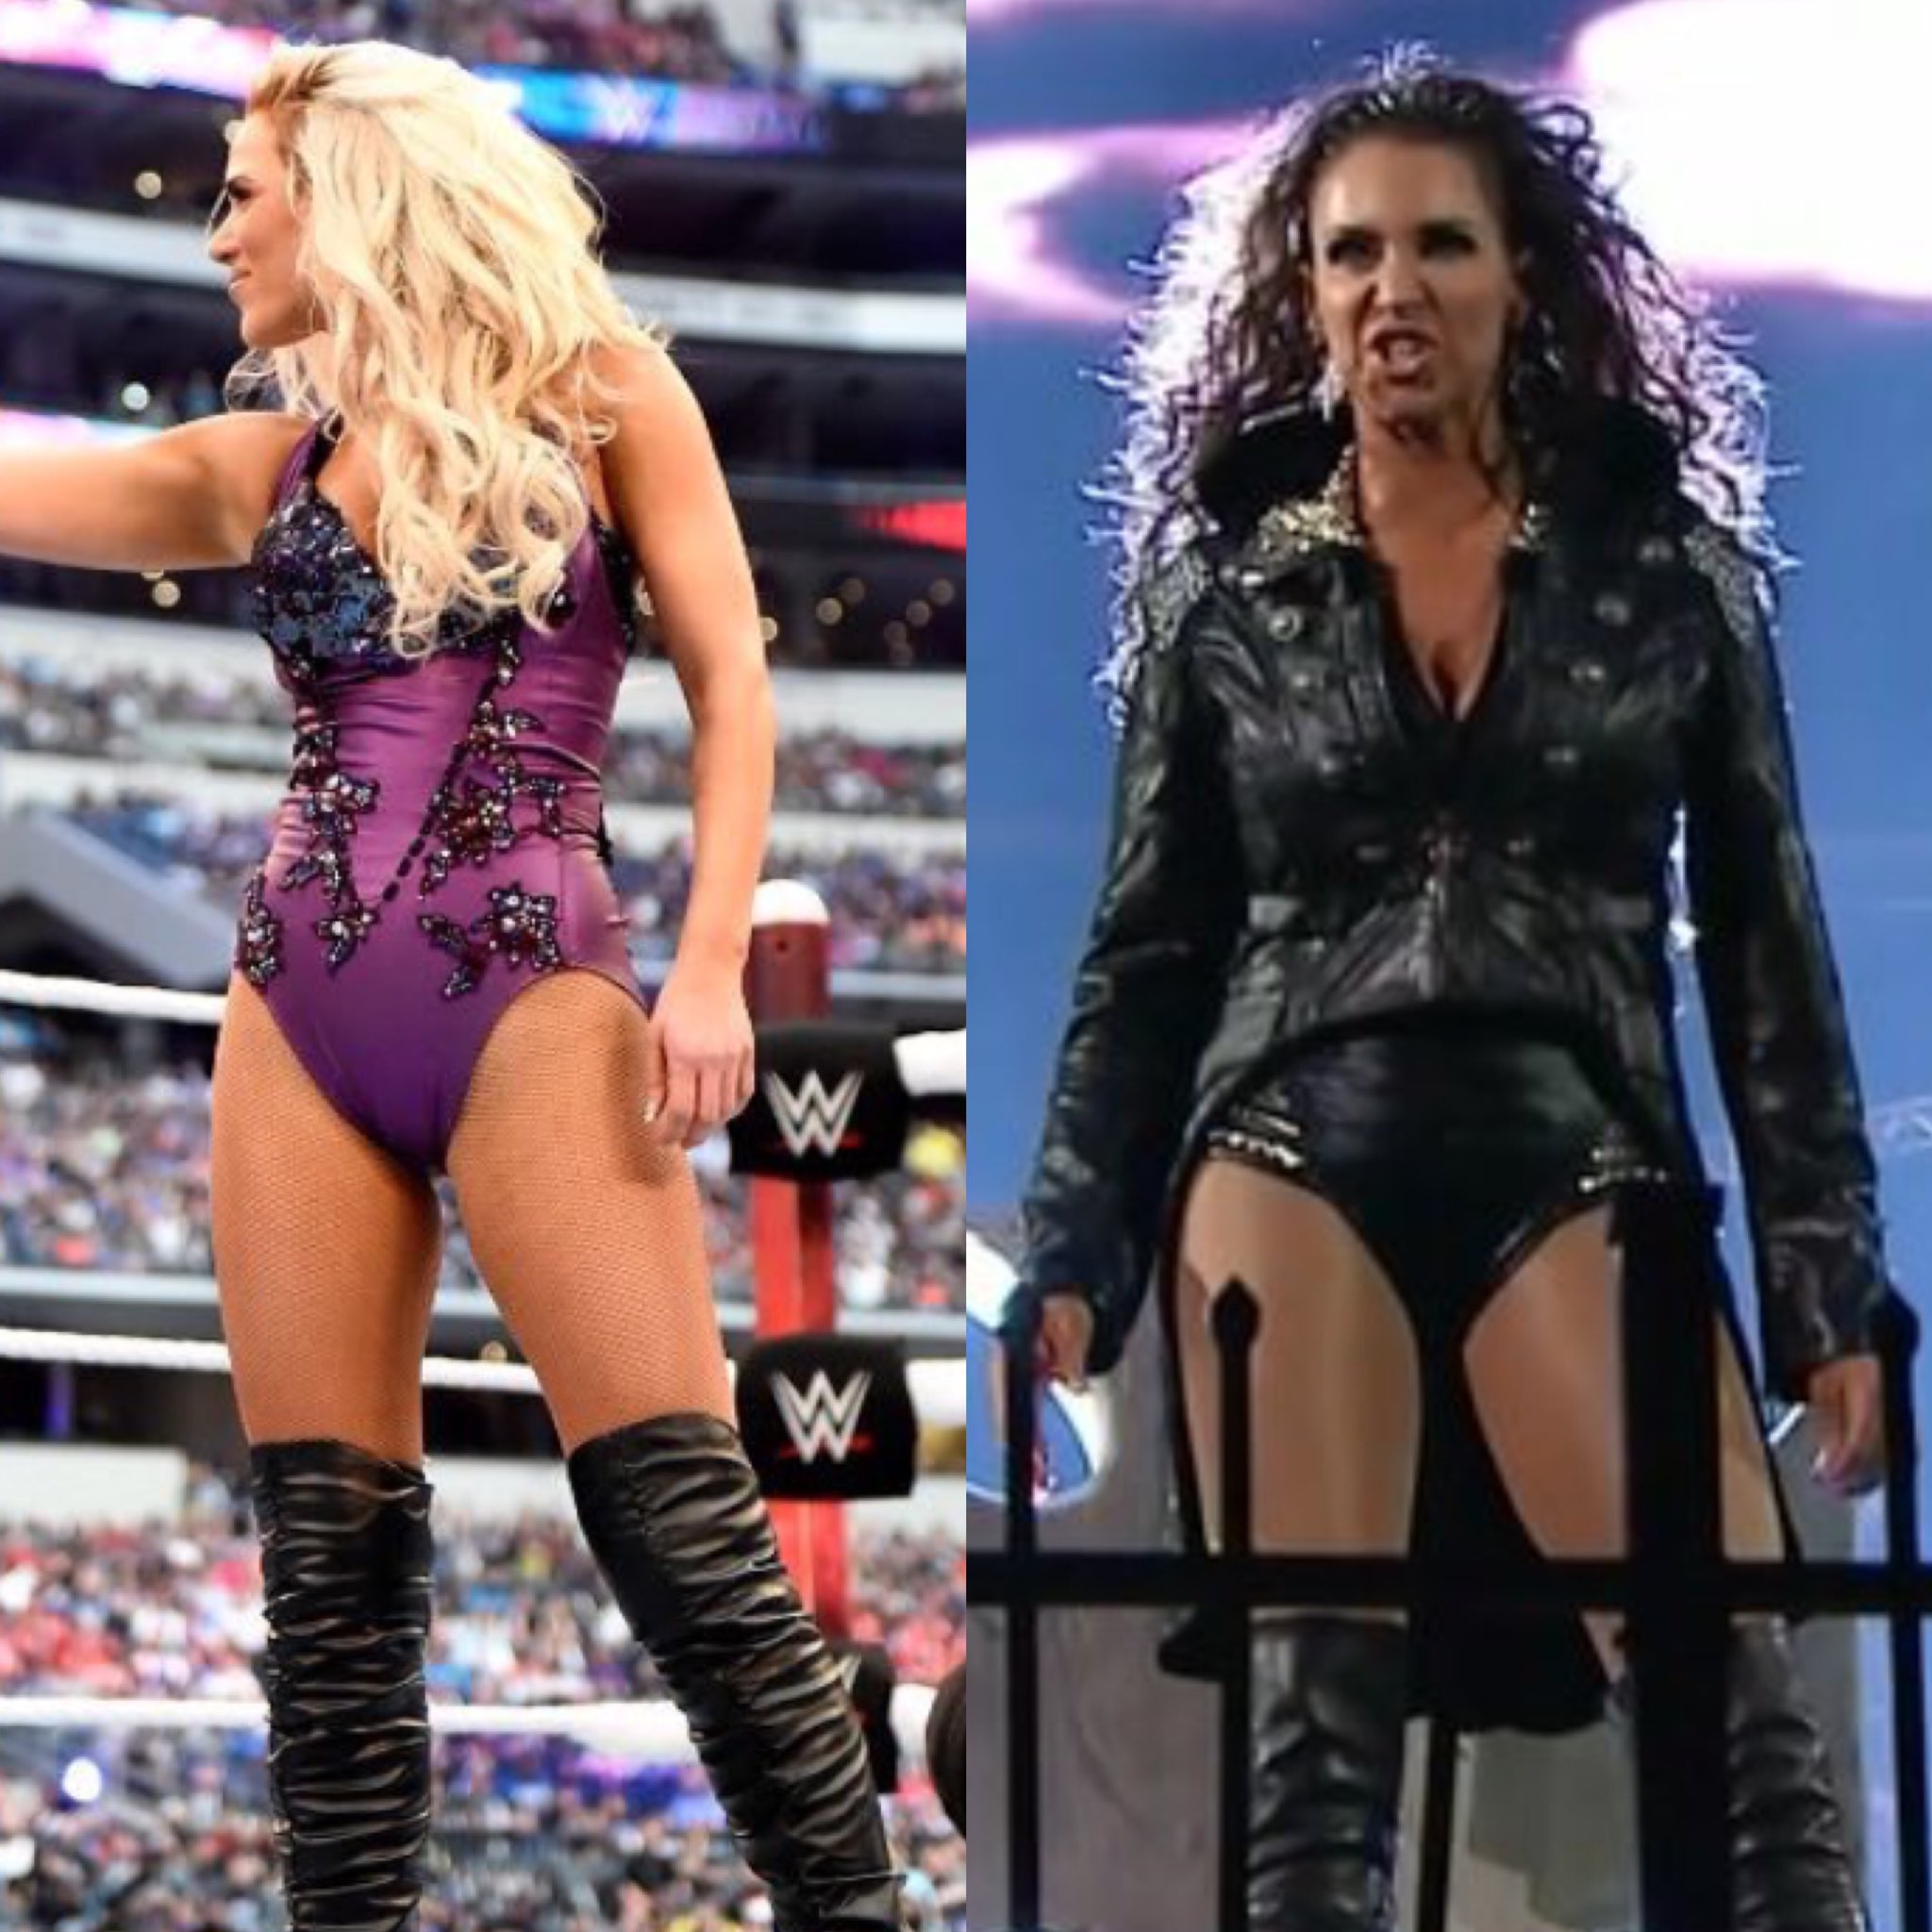 Who had the hottest outfit?RT for Lana Like for Stephanie McMahon. 